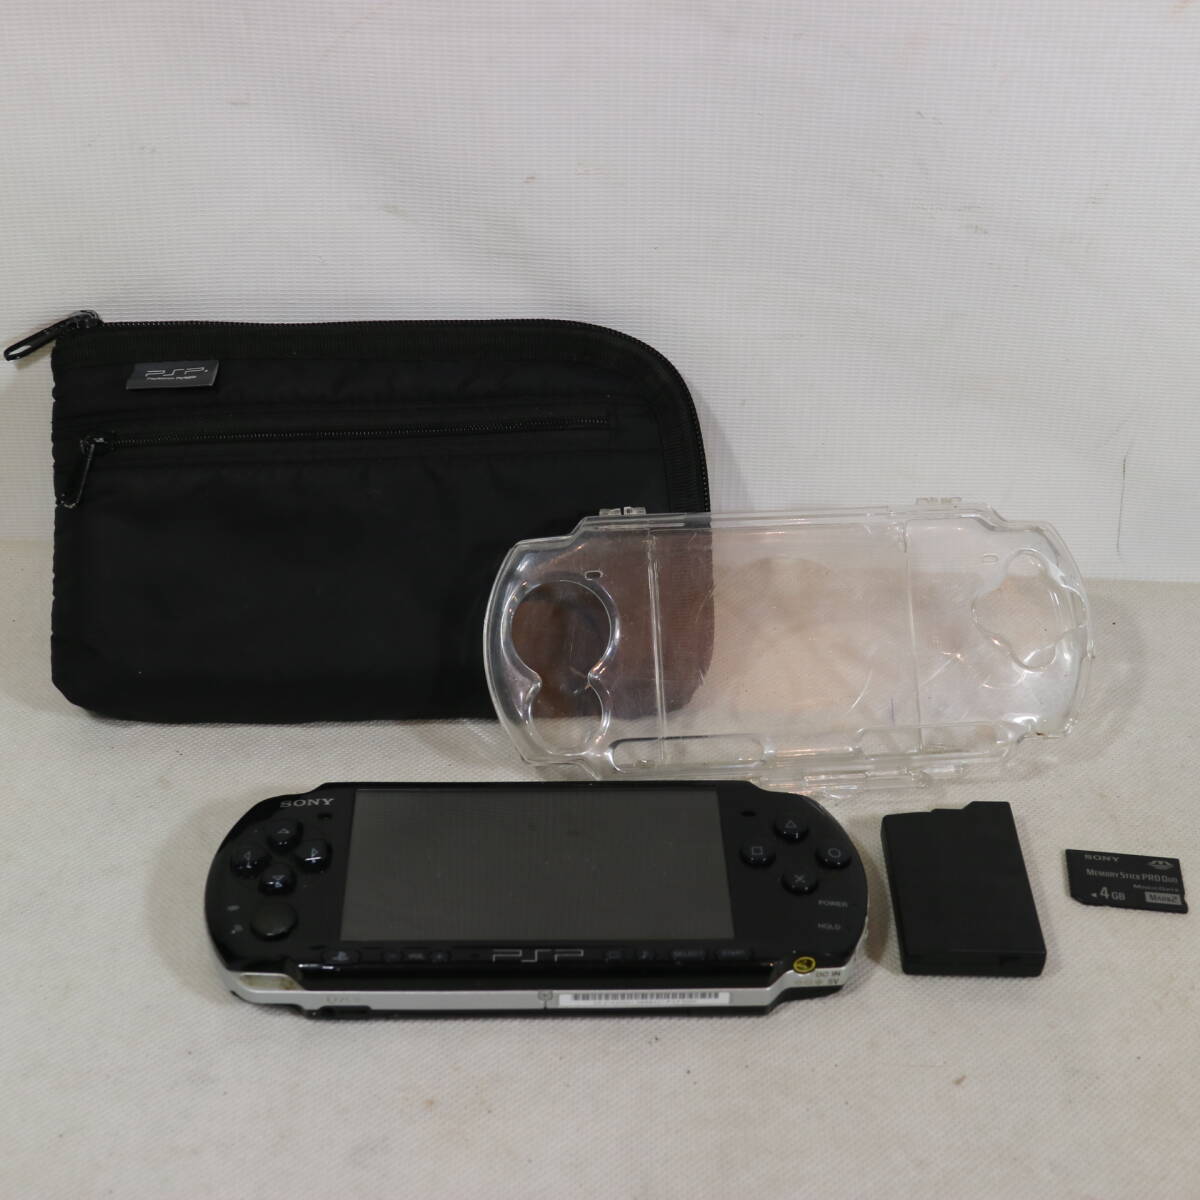  Junk SONY Sony PlayStation portable PSP 3000 body memory stick 4GB special case 2 point battery pack used 